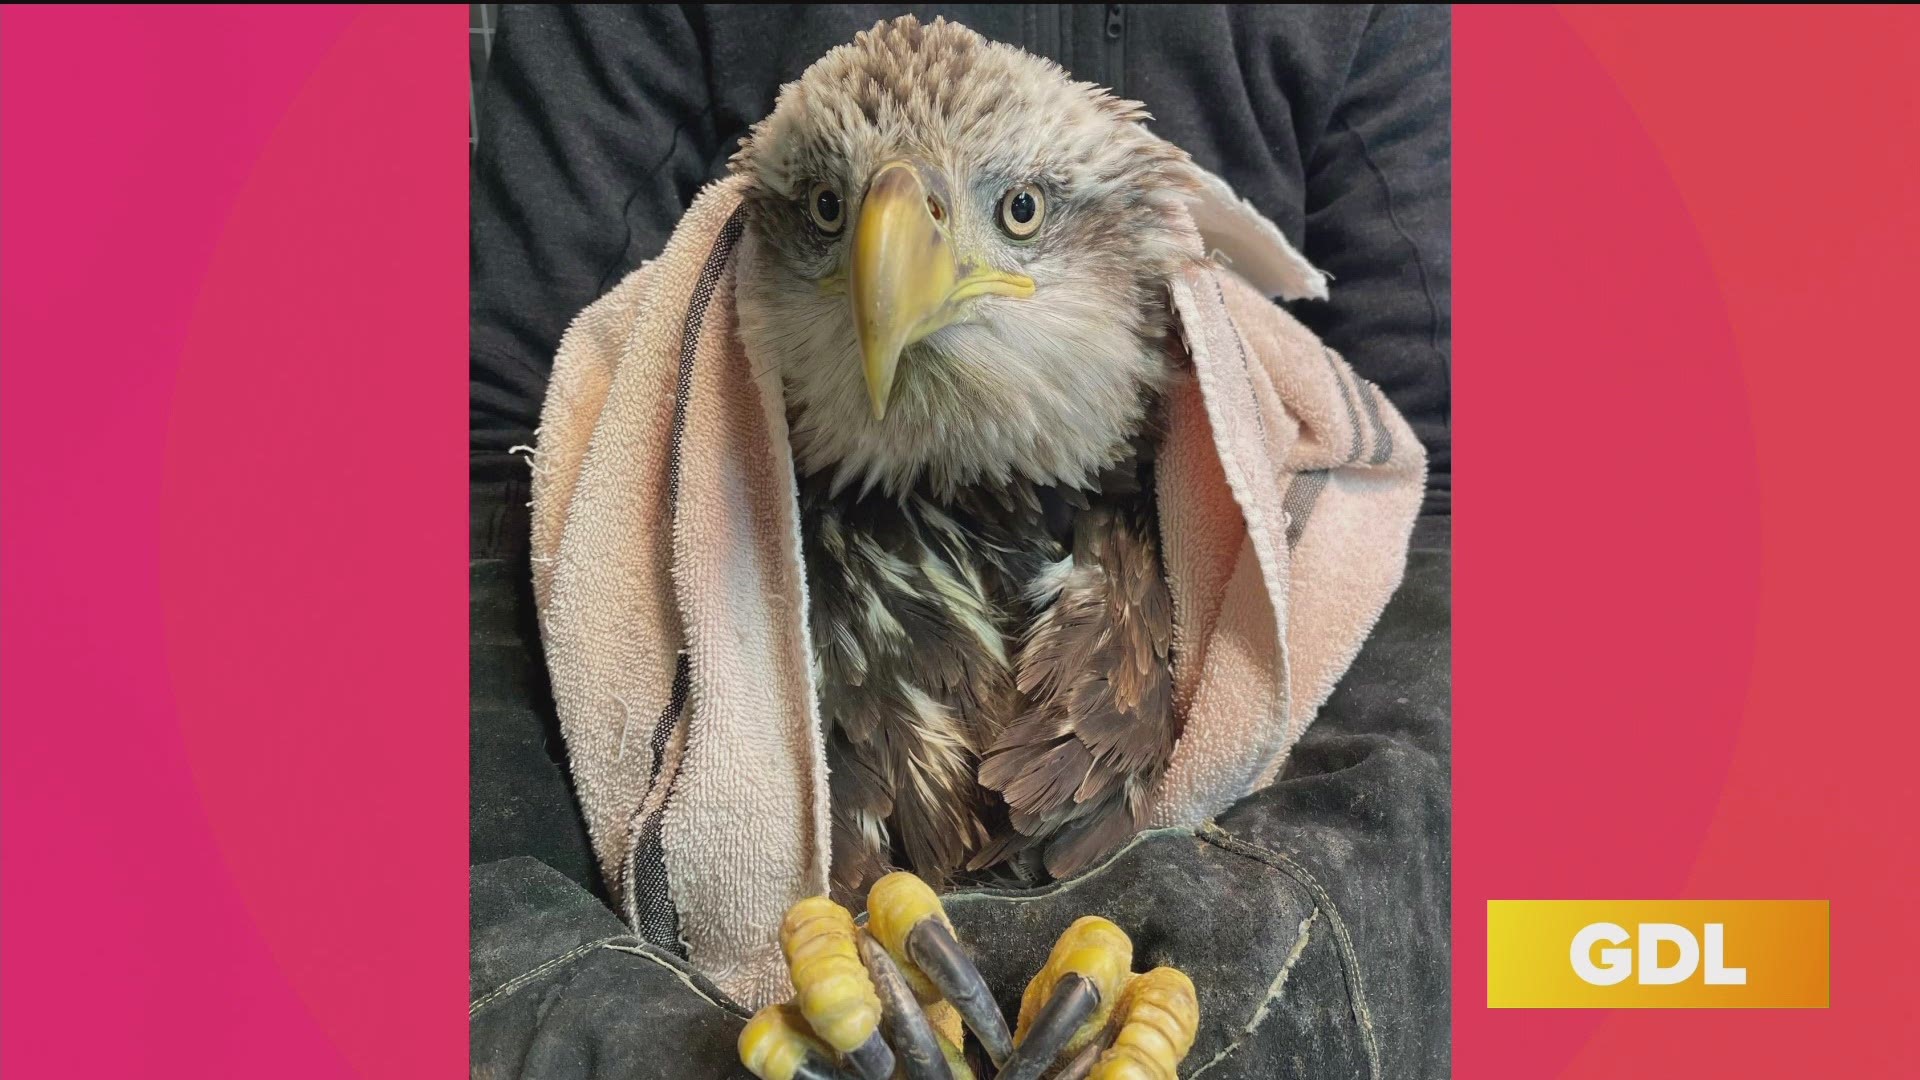 GDL's Joann Dickson talks to several people involved with the rescue of an injured bald eagle at Bernheim Forest and gets an update on her health.